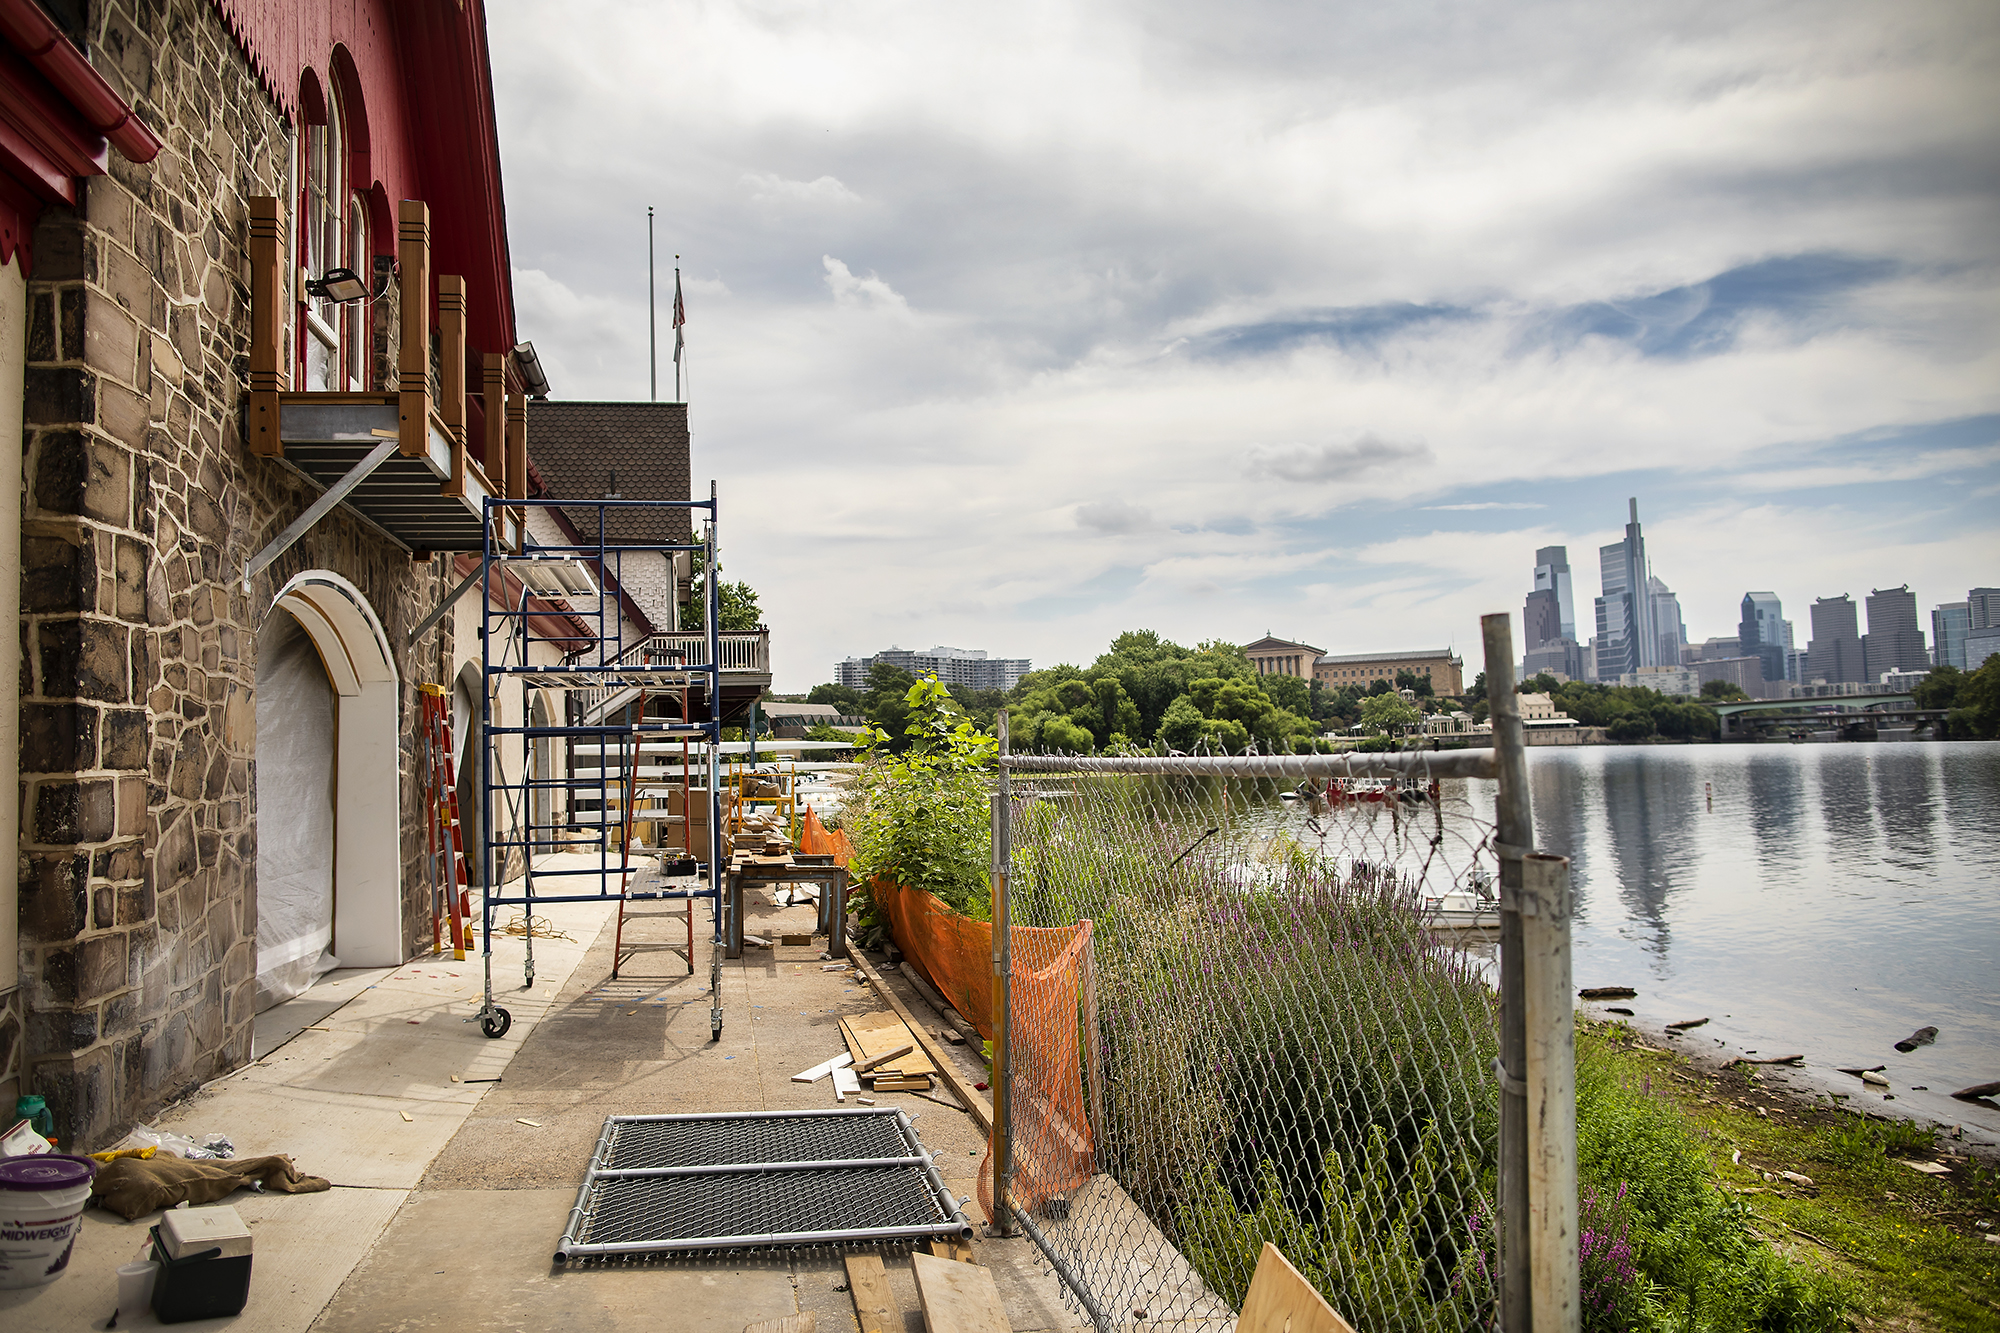 The Boathouse on the Schuylkill River with the city of Philadelphia in the distance.